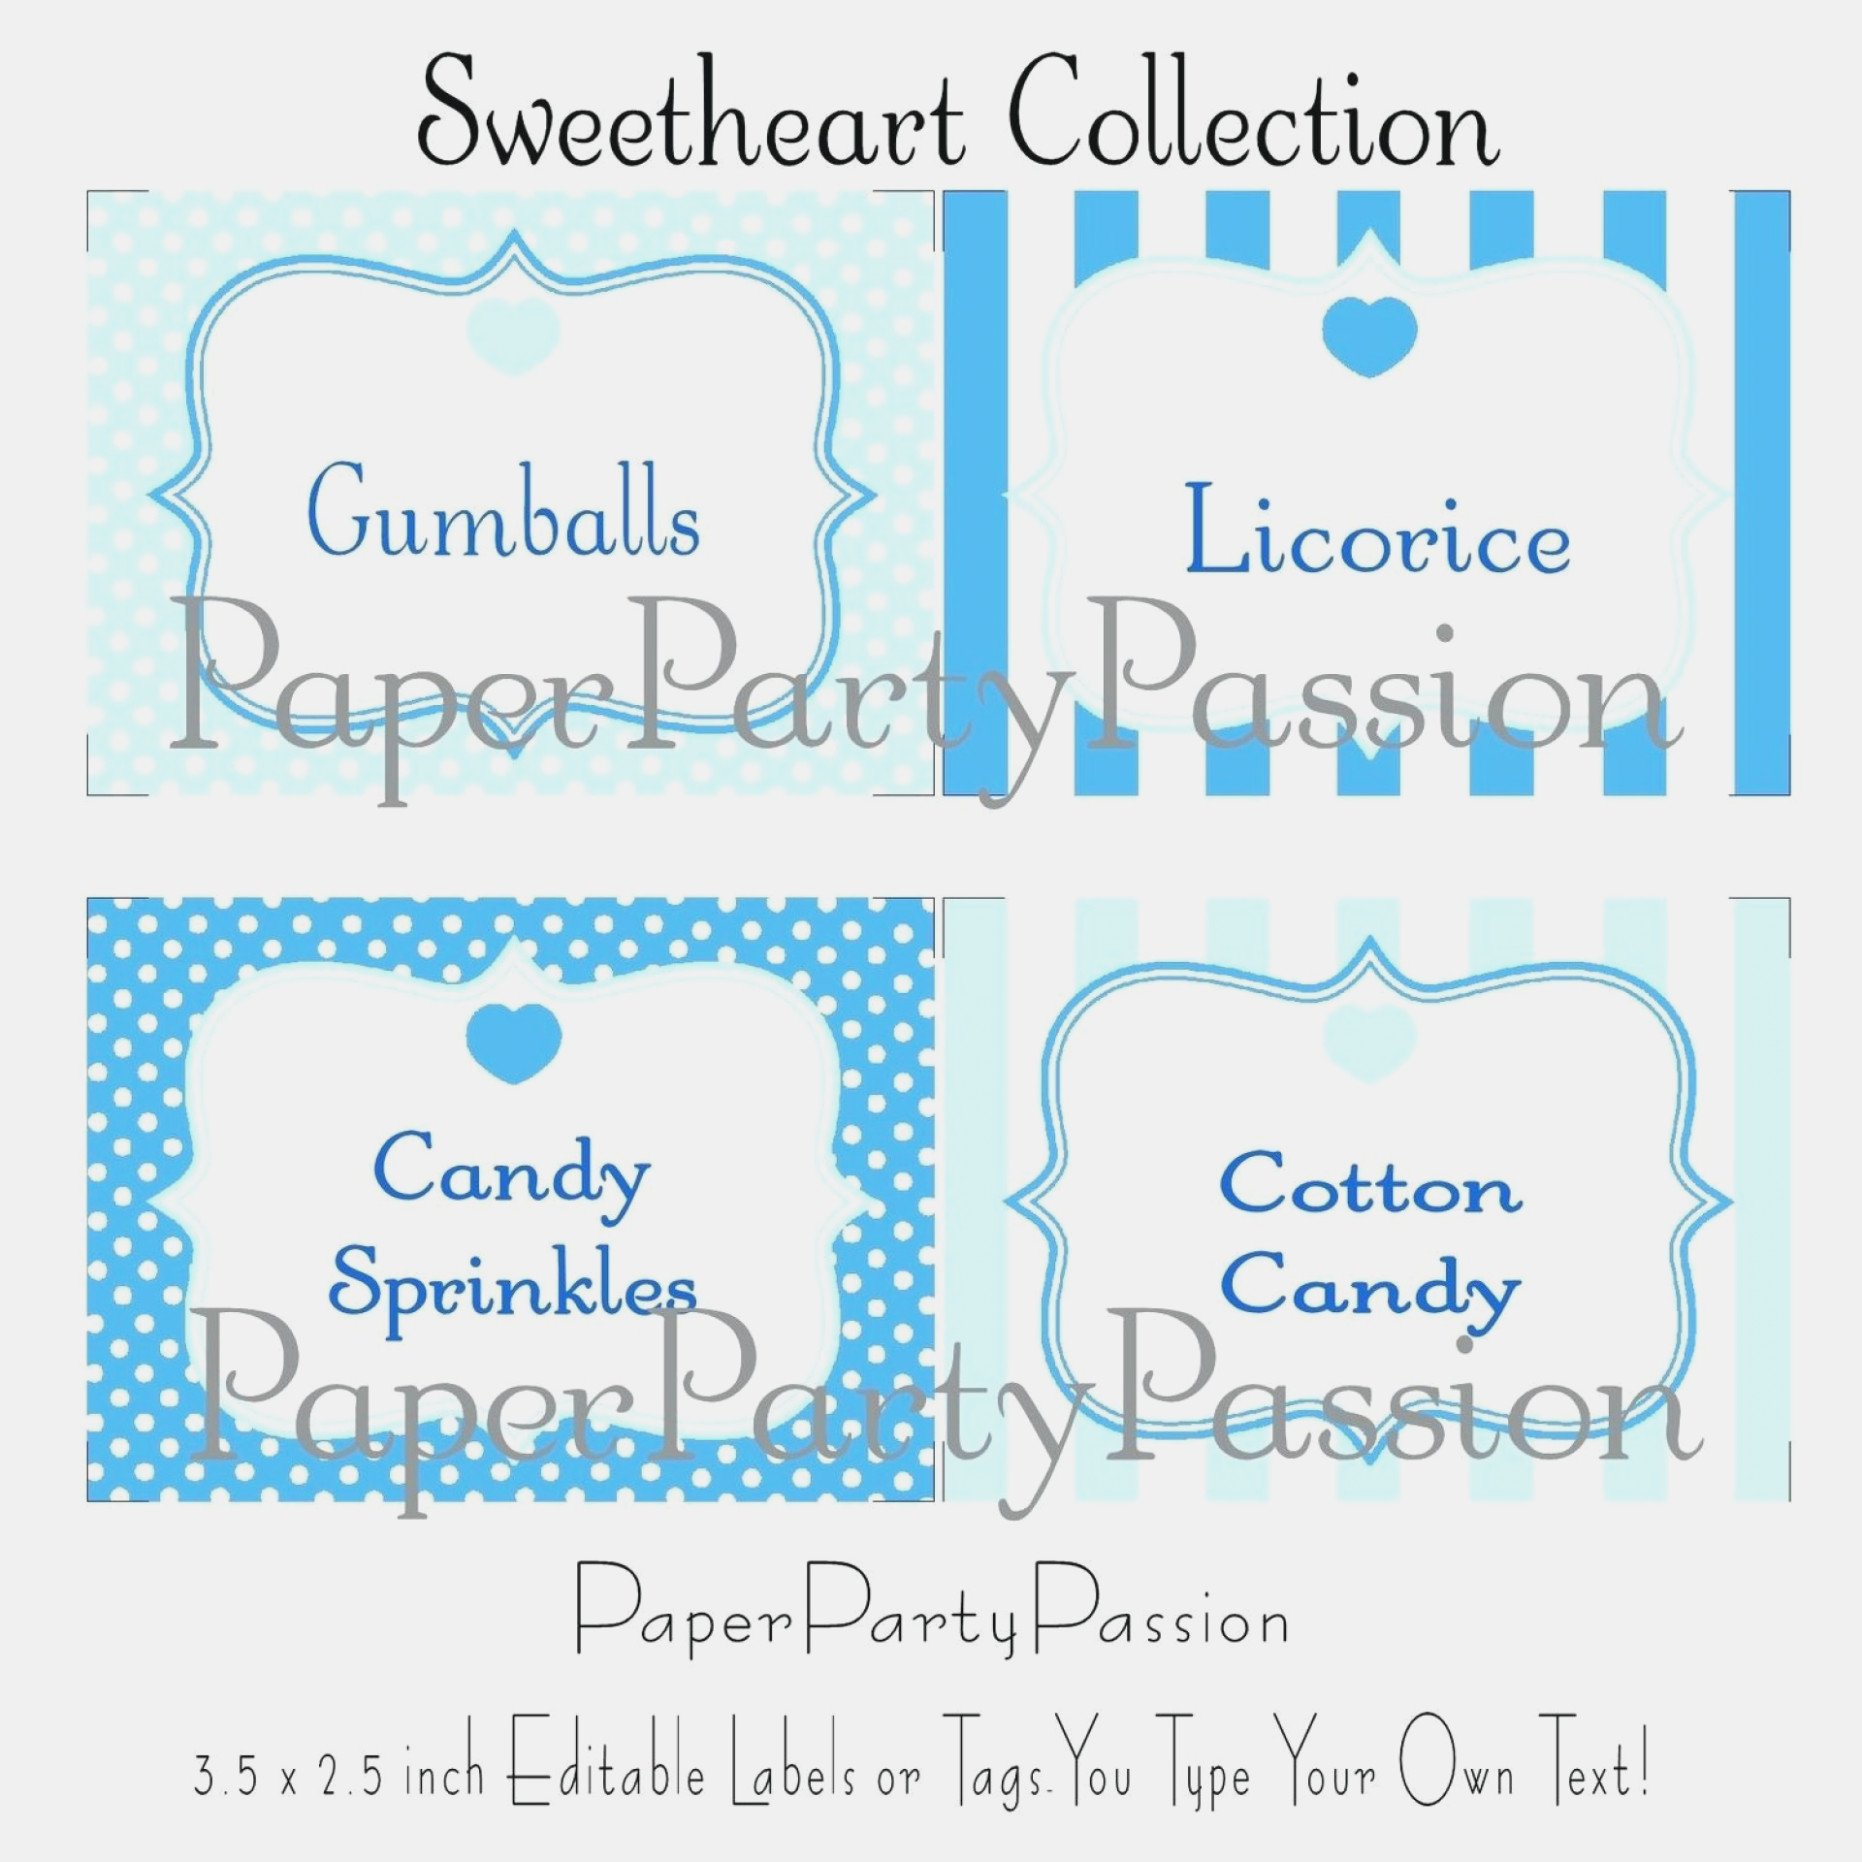 Sensational Free Printable Candy Buffet Labels Templates .. – Label - Free Printable Candy Buffet Labels Templates